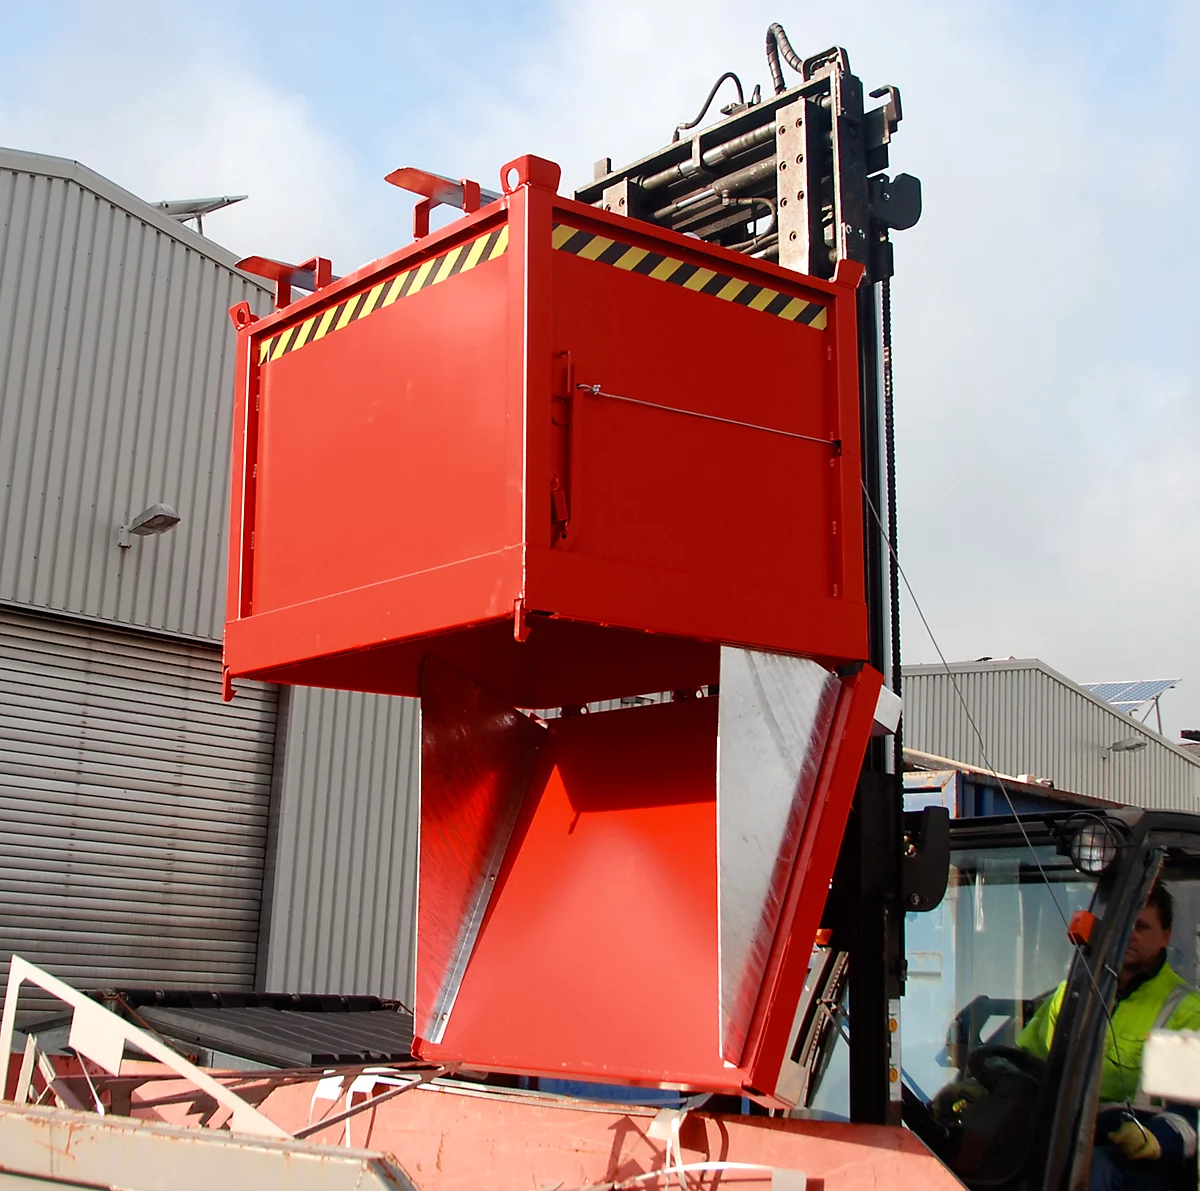 Bodemklepcontainer FB 2000, rood